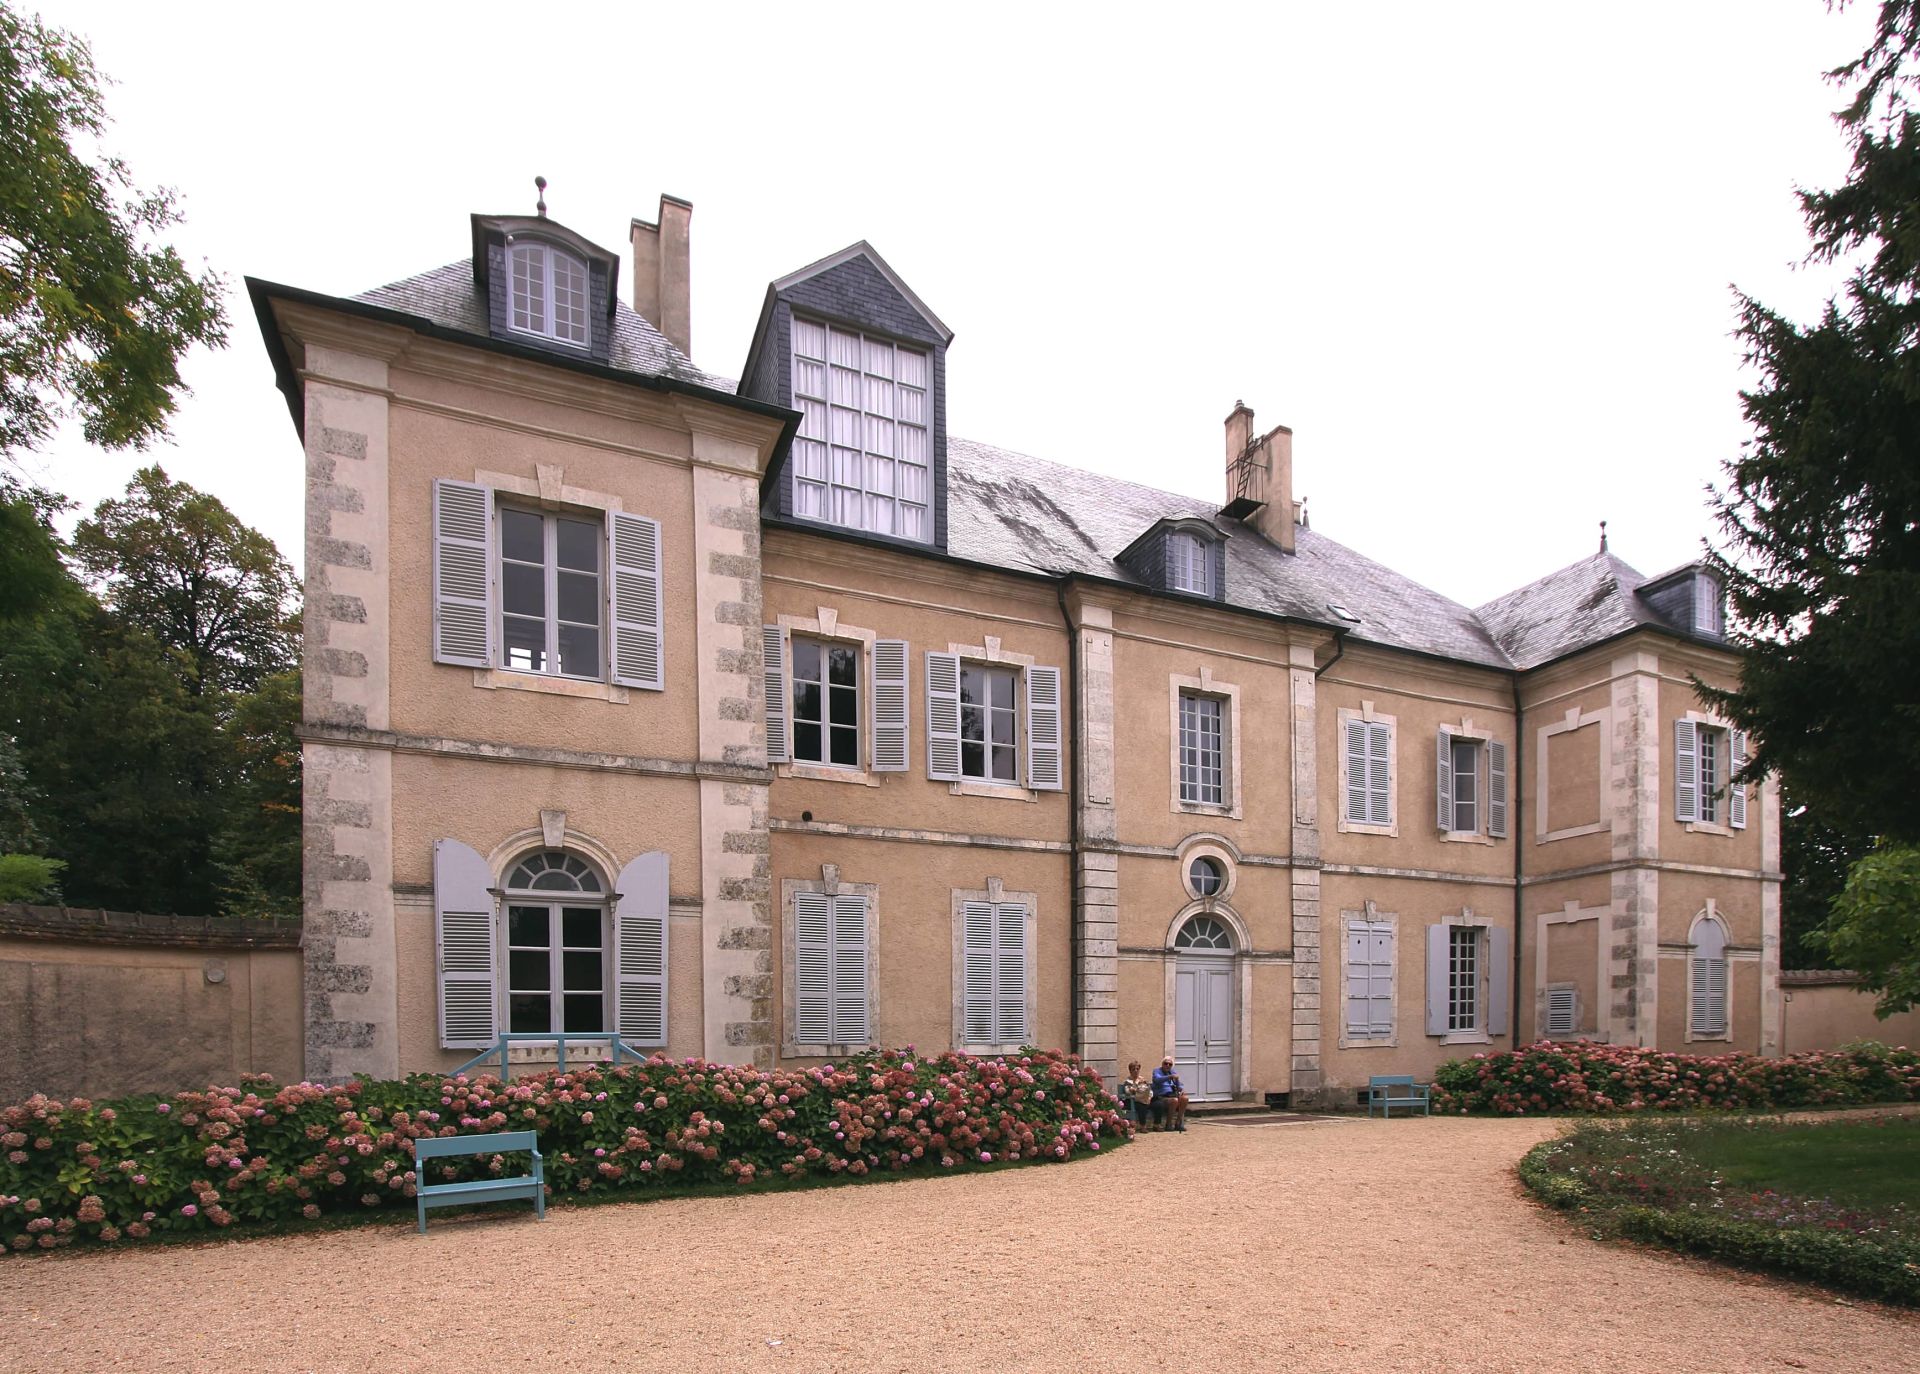 The House of George Sand